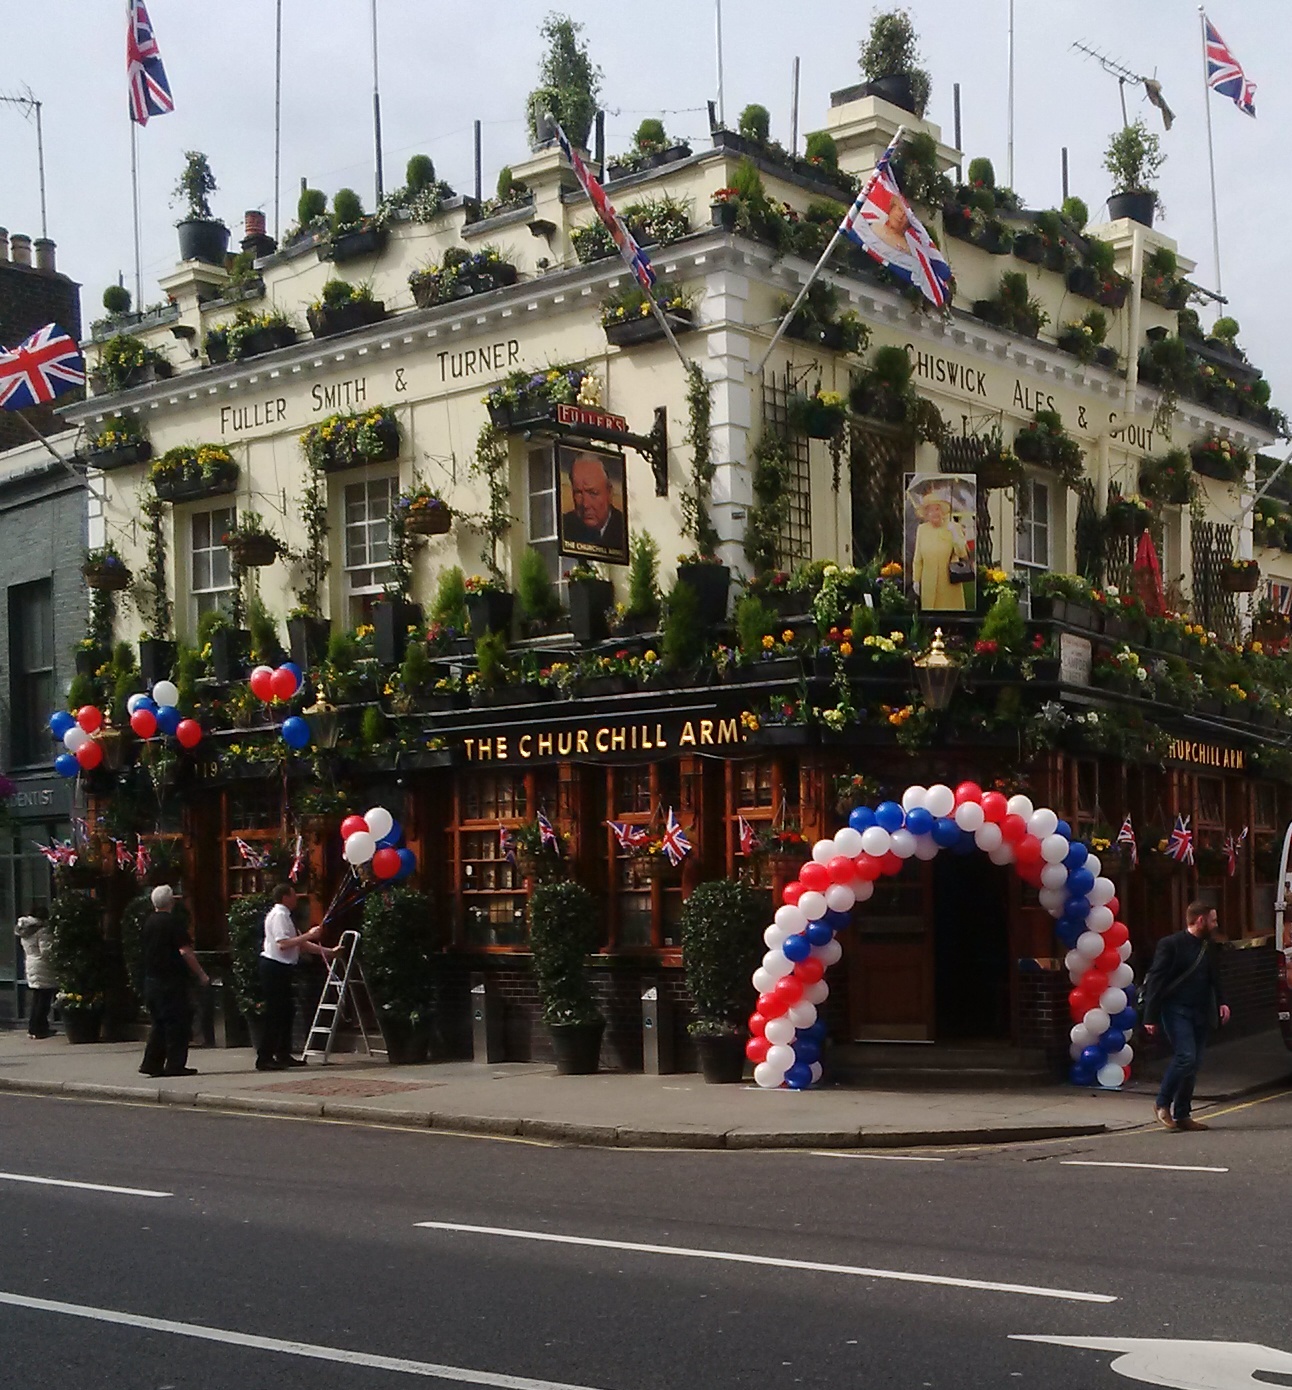 Red, White and Blue Spiral Arch for The Churchill Arms, Kensington